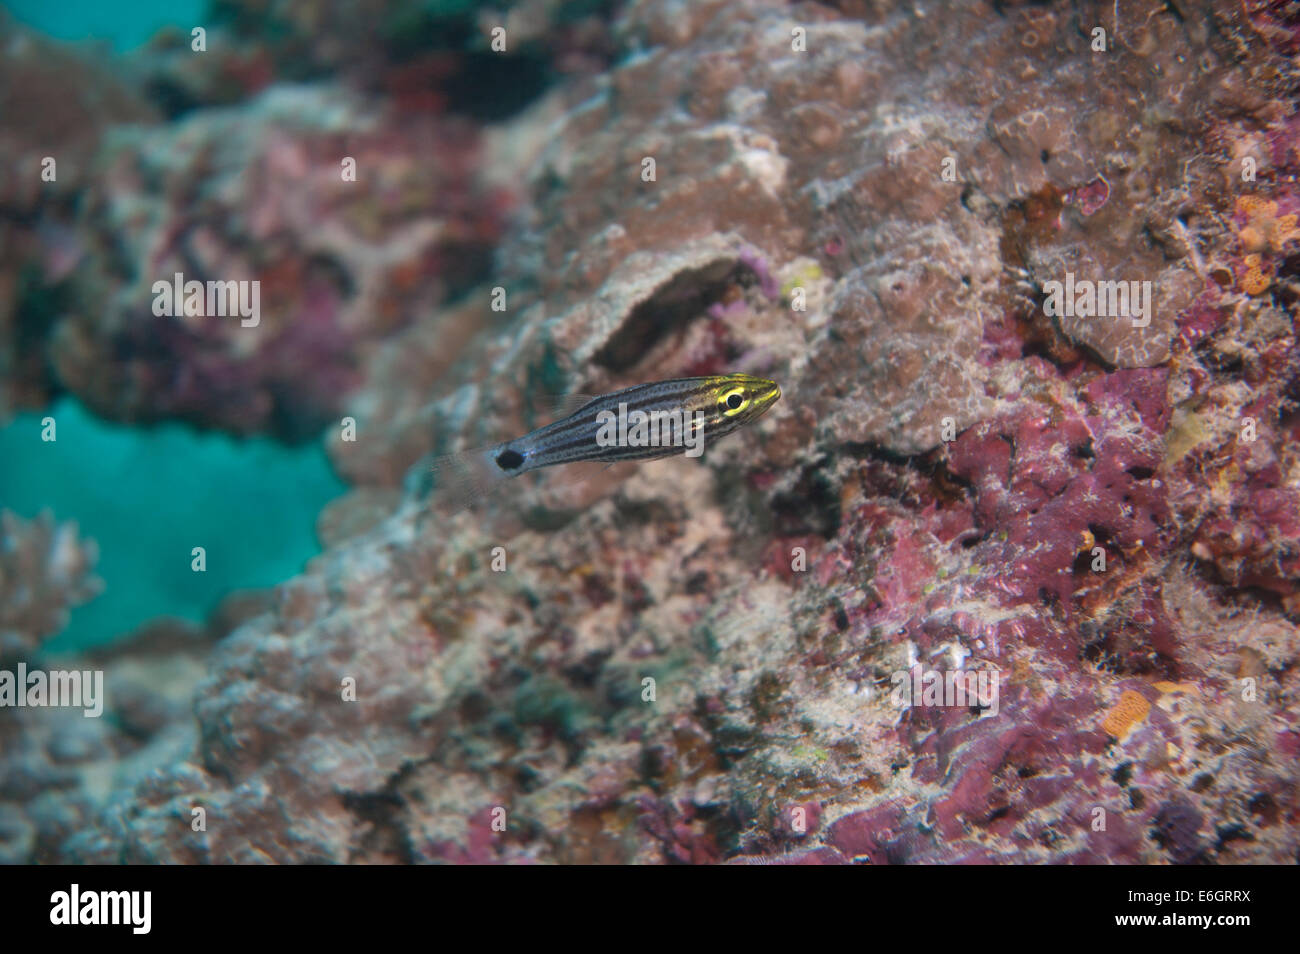 Tiger Cardinal fish in a coral reef of Maldives Stock Photo